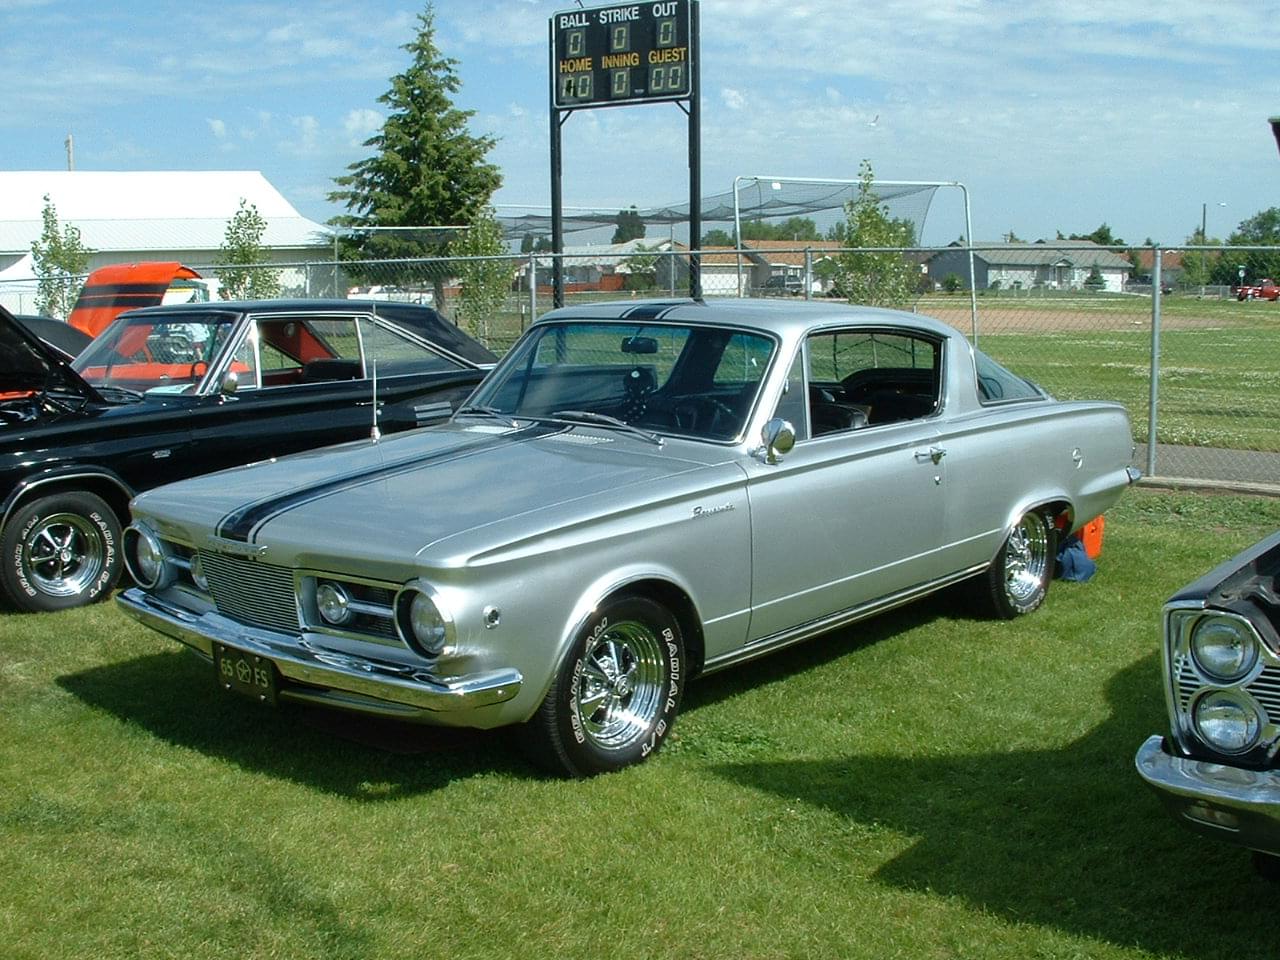 AJ’s Car of the Day: 1965 Plymouth Barracuda Formula S Coupe